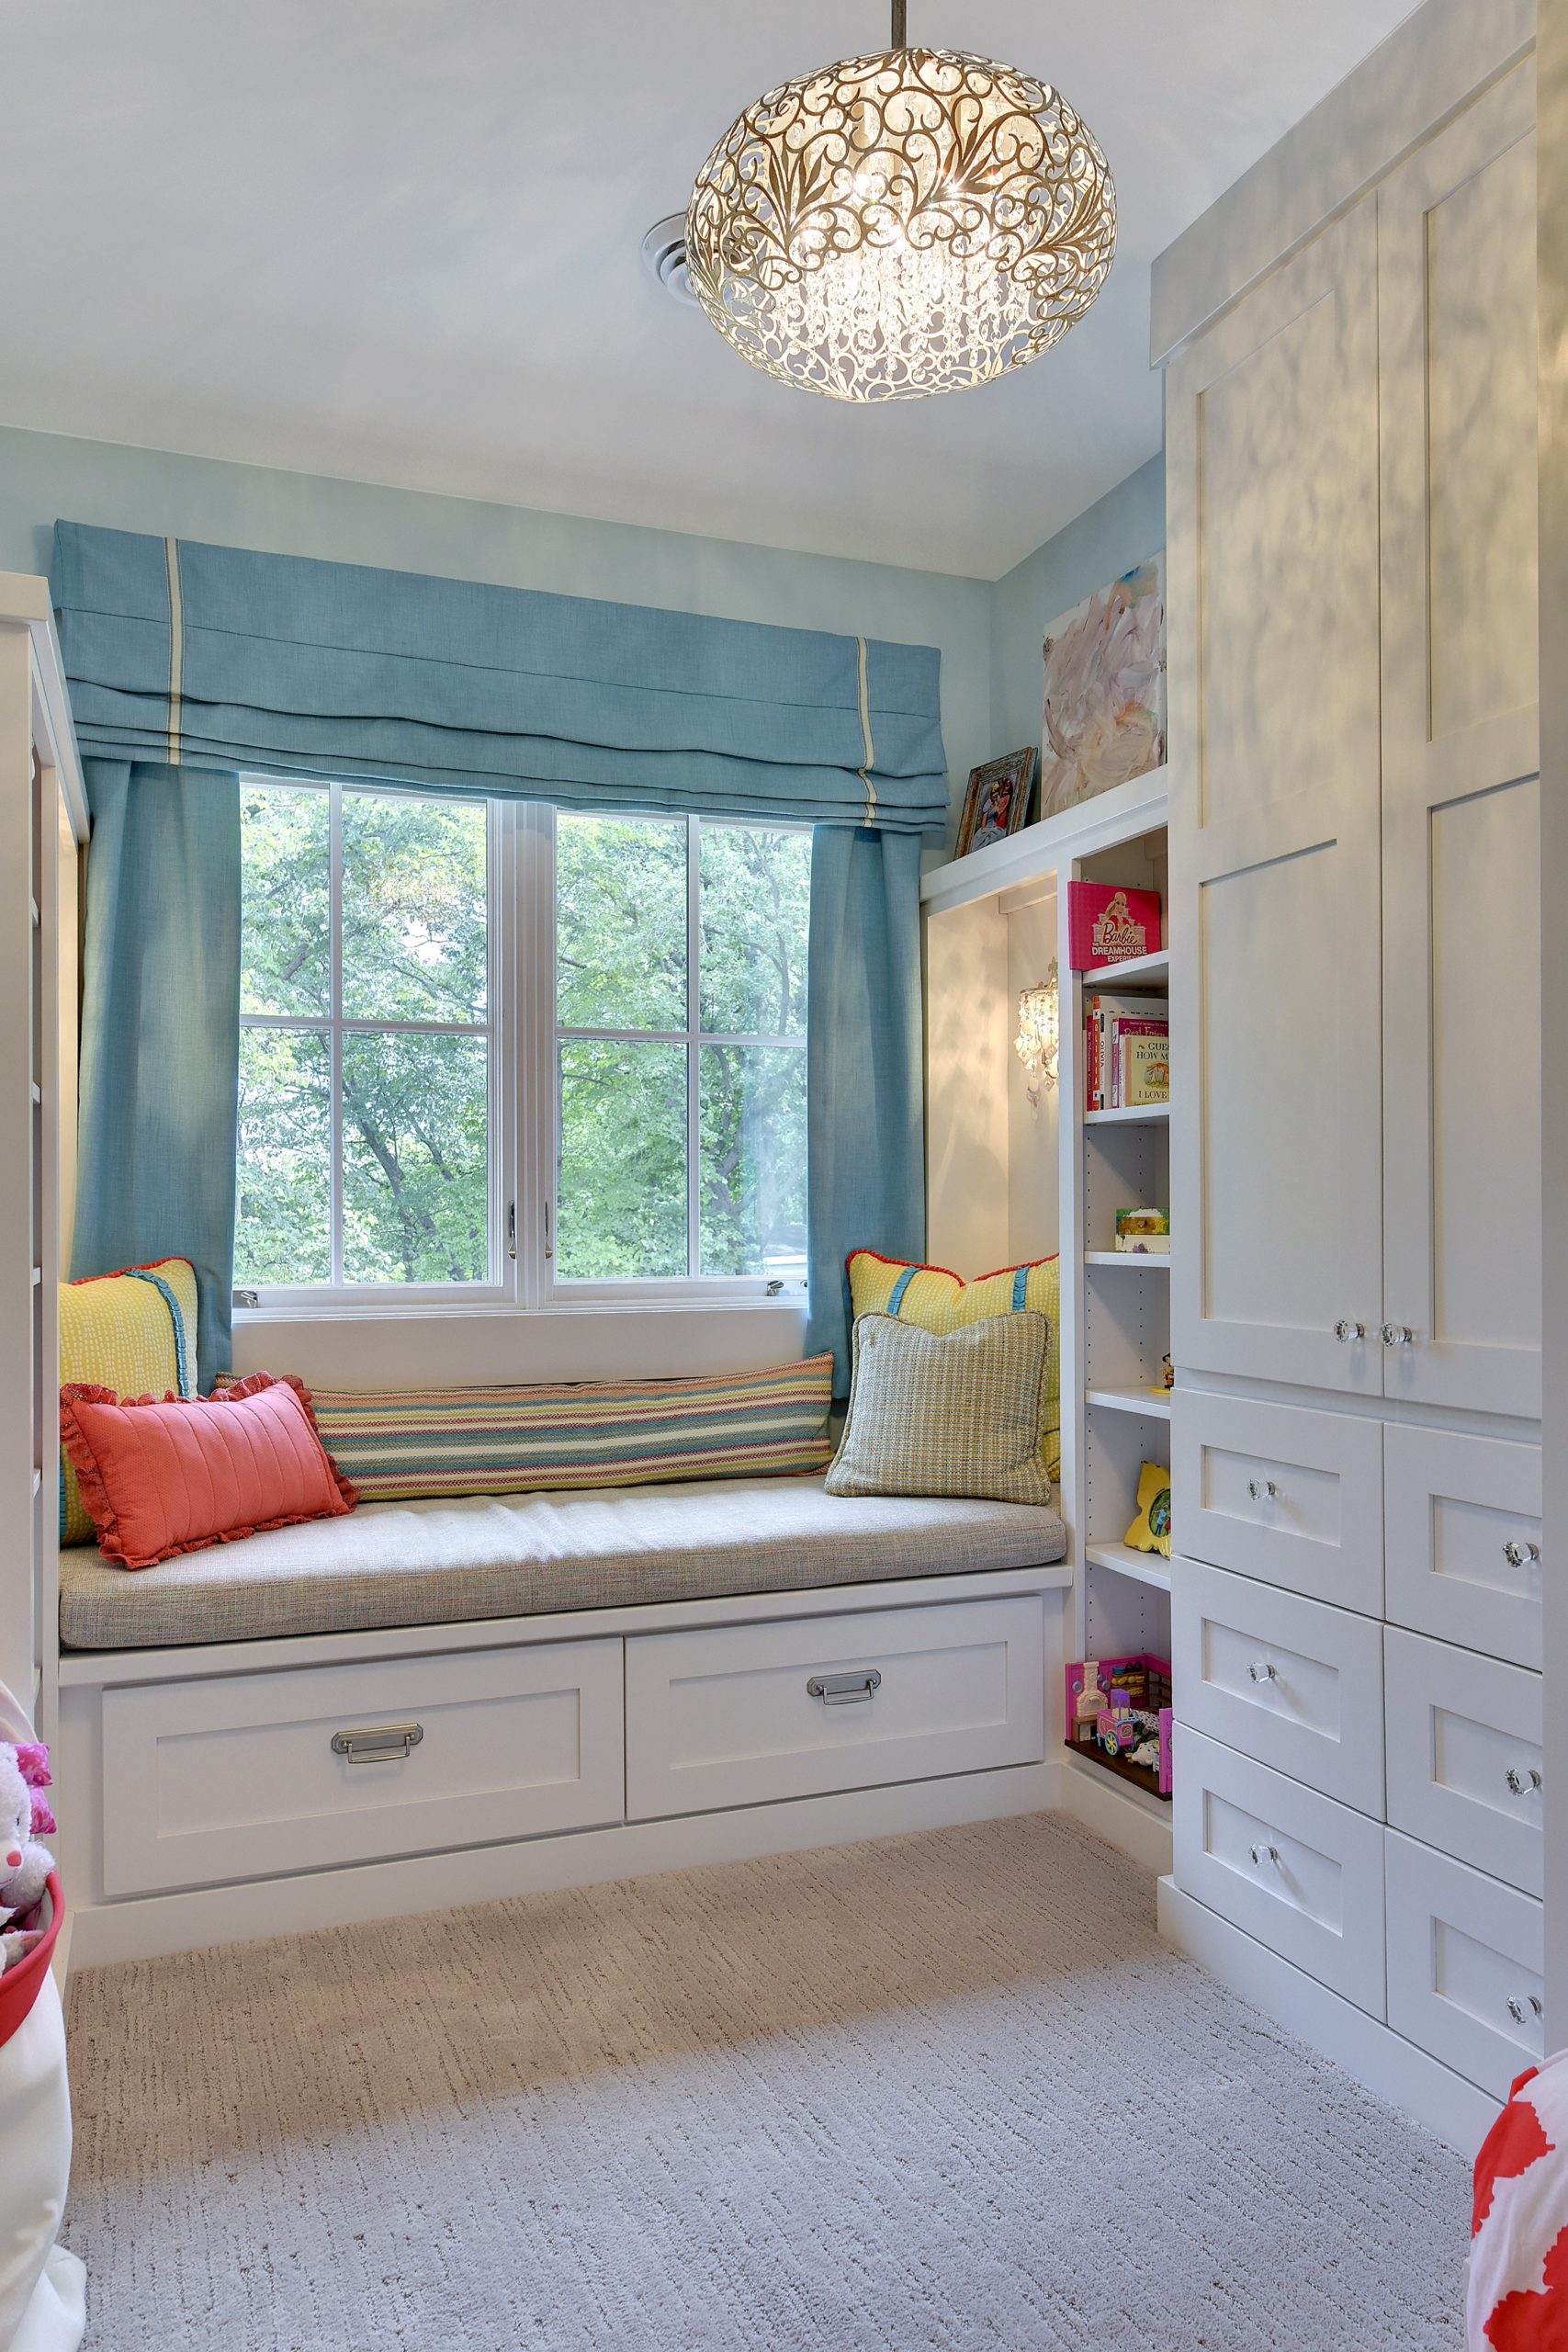 Pastel blue bedroom with cushioned bench drawers by window, spring like colorful accents and white builtin cabinet.